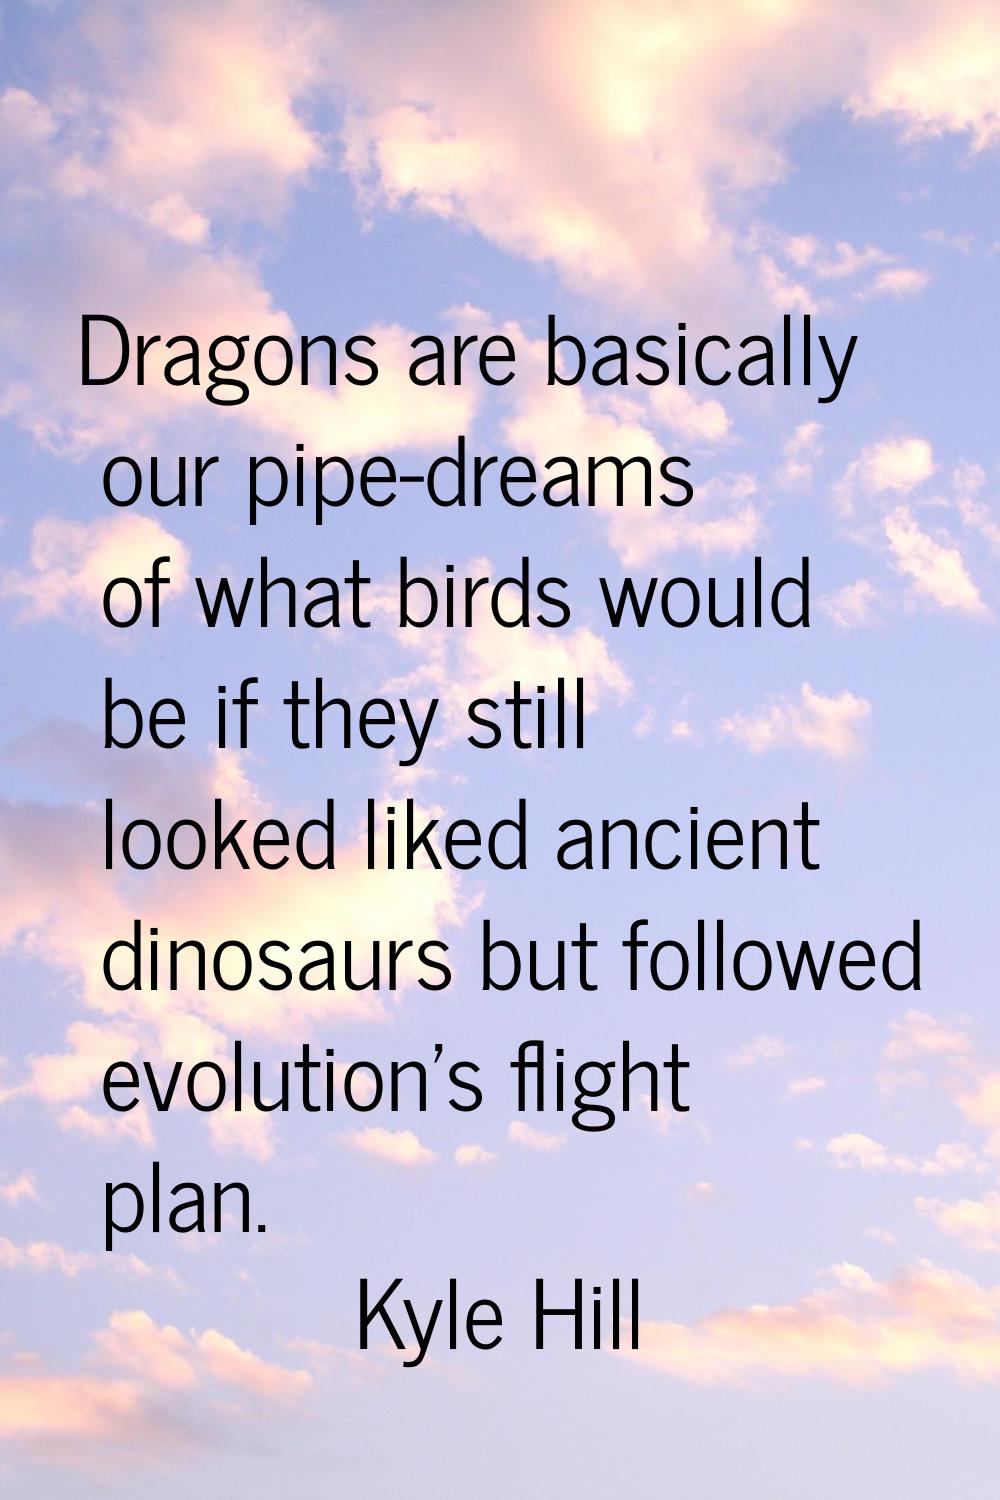 Dragons are basically our pipe-dreams of what birds would be if they still looked liked ancient din